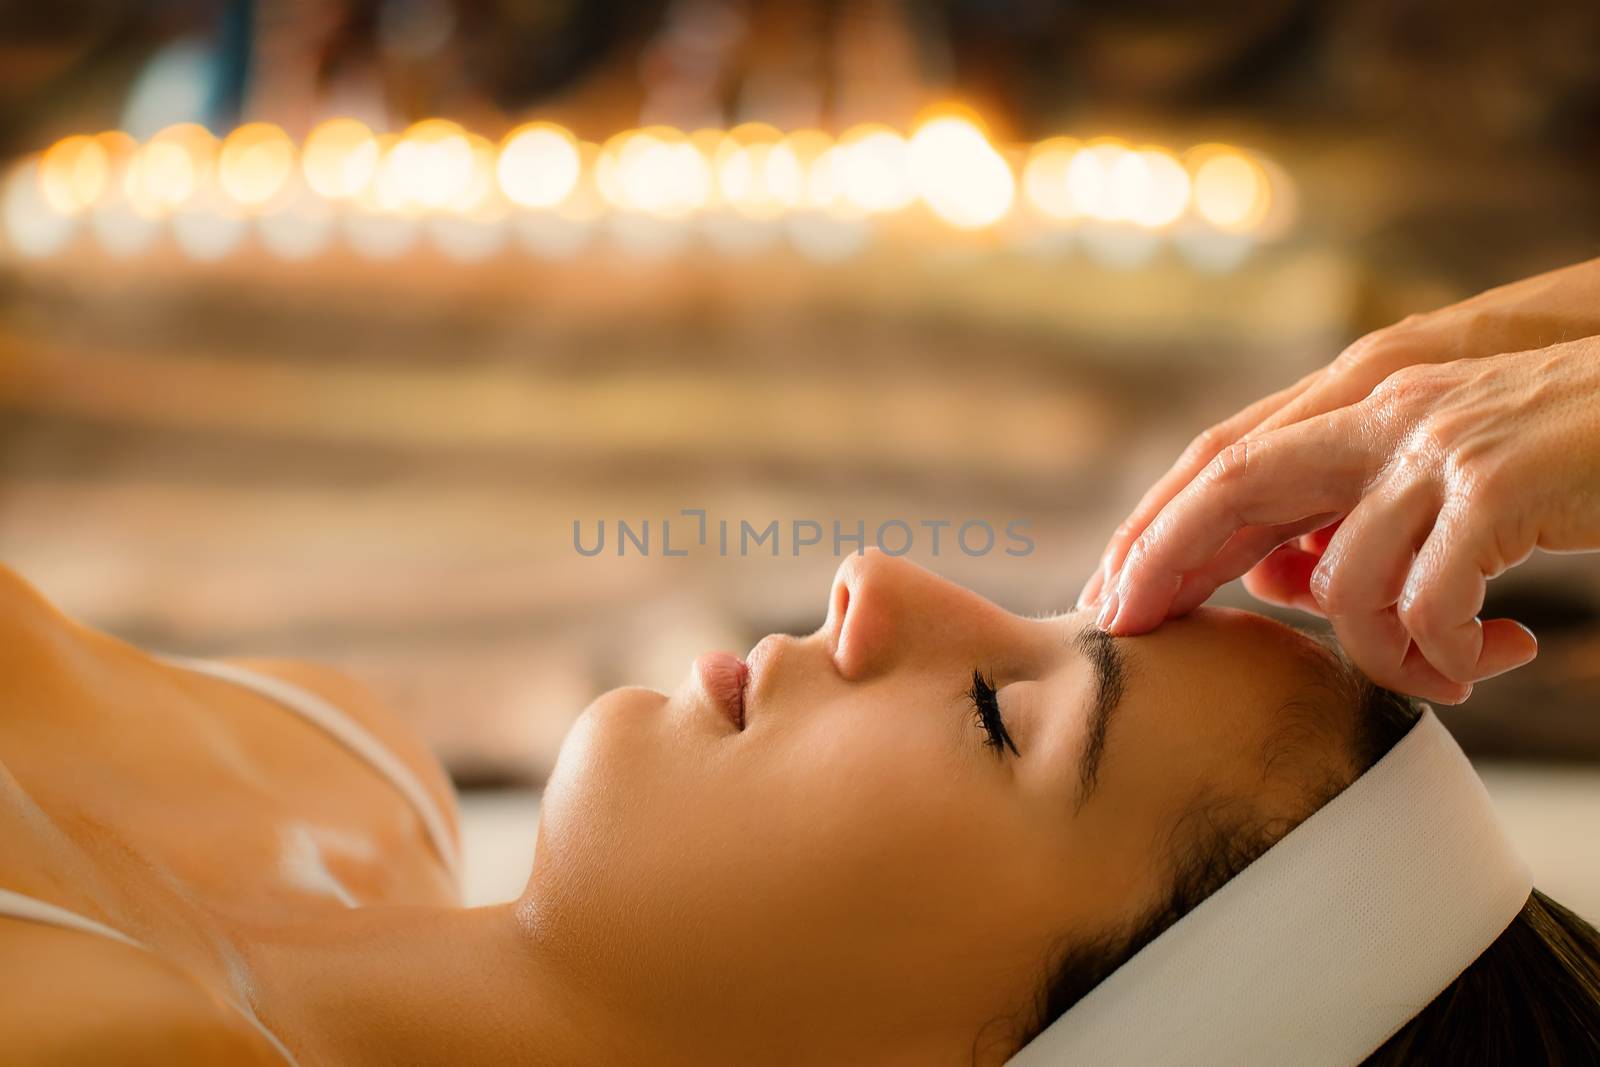 Close up portrait of woman having head massage in spa. Low key atmosphere with out of focus candles glowing in background. Therapist touching girl’s forehead.